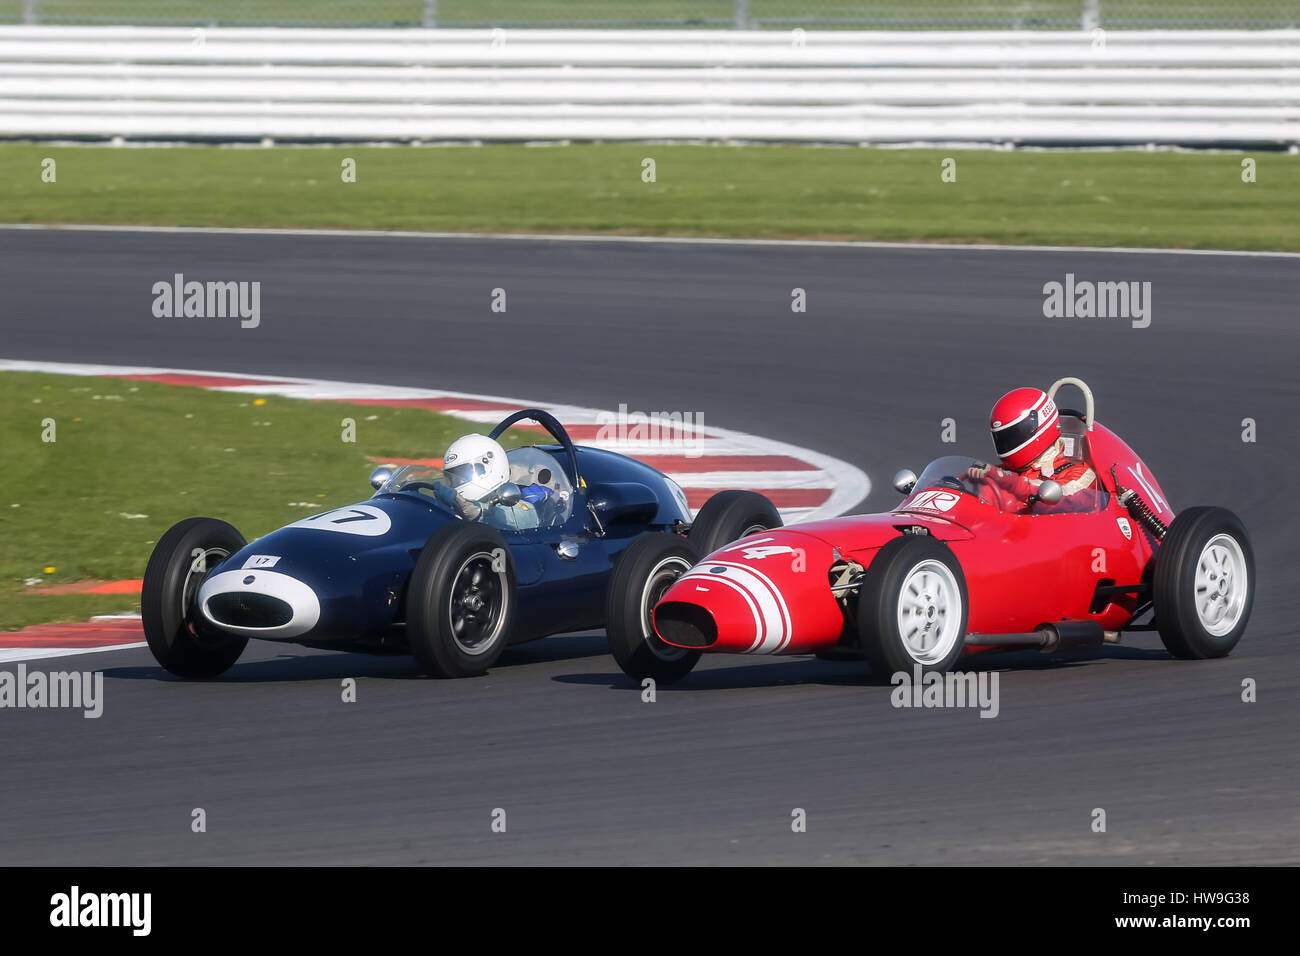 Taken at the Vintage Sports Car Club (VSCC) Spring Start meeting at Silverstone on 18th April 2015 Stock Photo